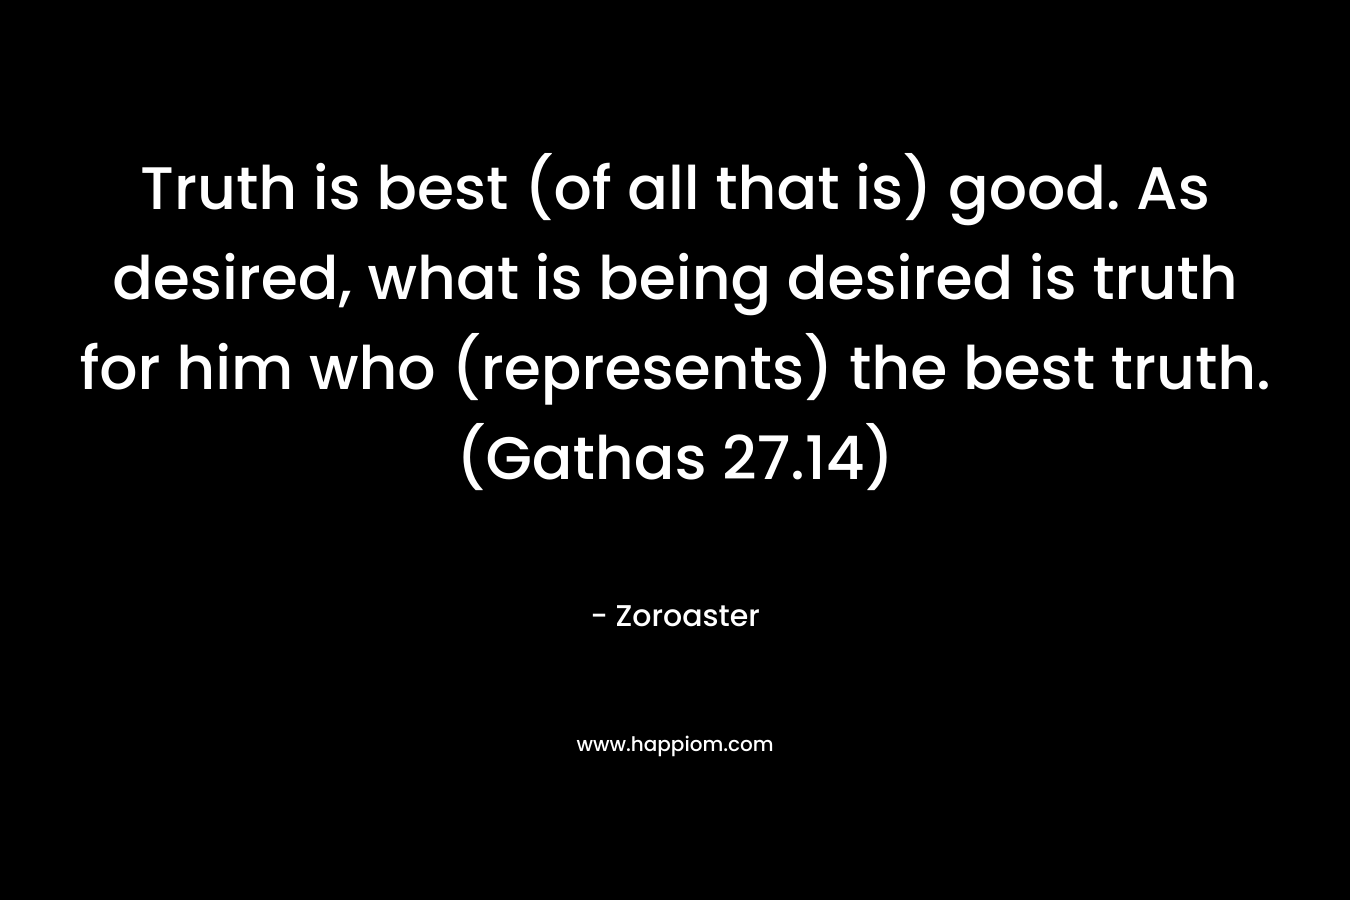 Truth is best (of all that is) good. As desired, what is being desired is truth for him who (represents) the best truth. (Gathas 27.14) – Zoroaster